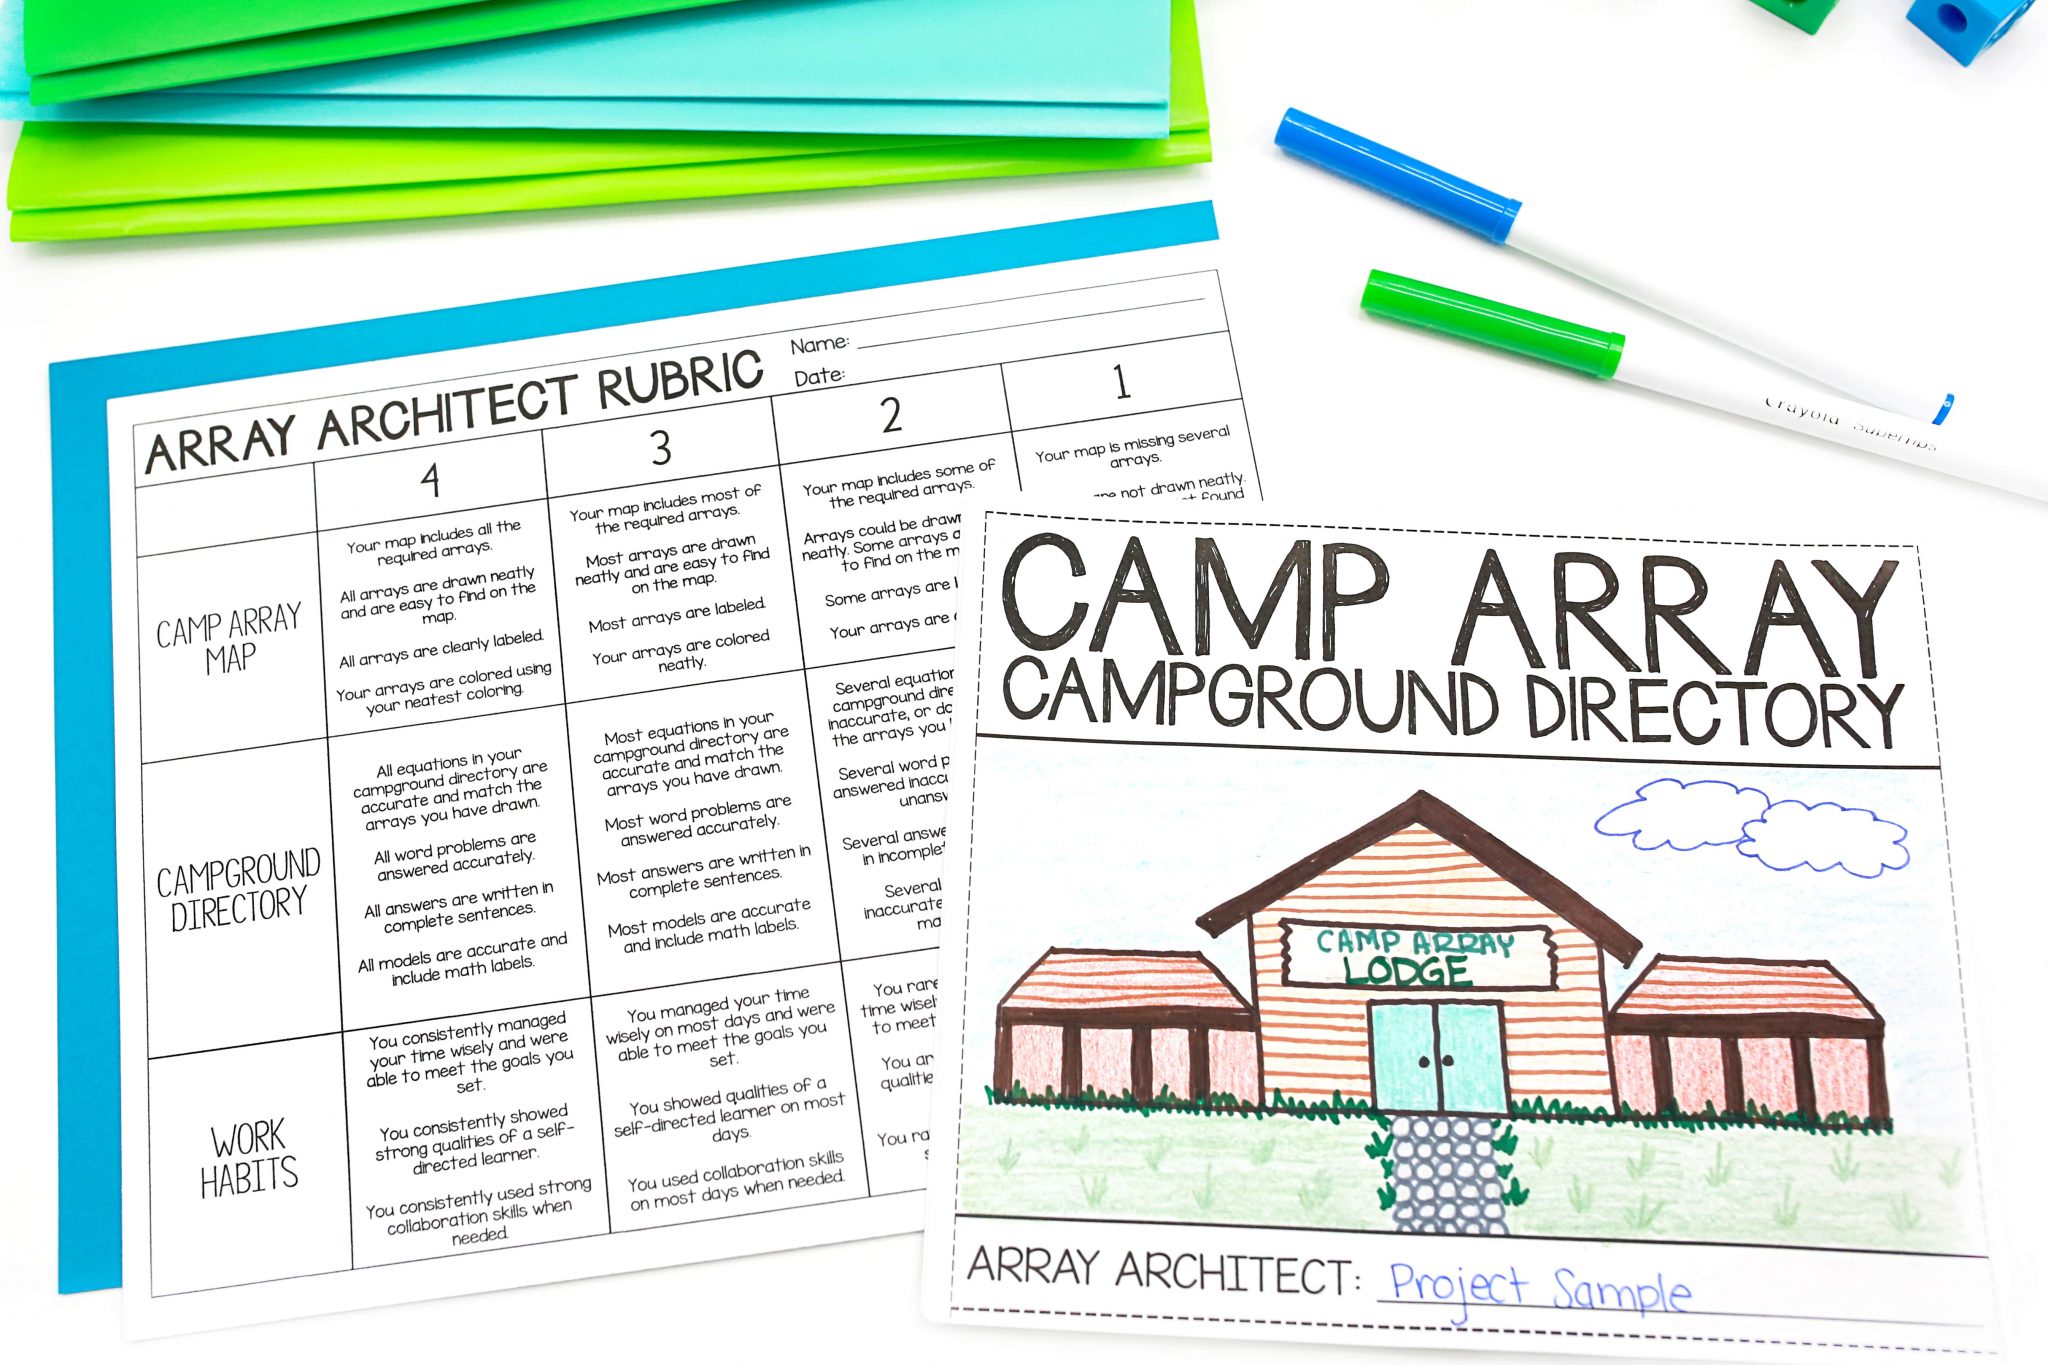 Camp Array multiplication project rubric laying  next to completed campground directory. 